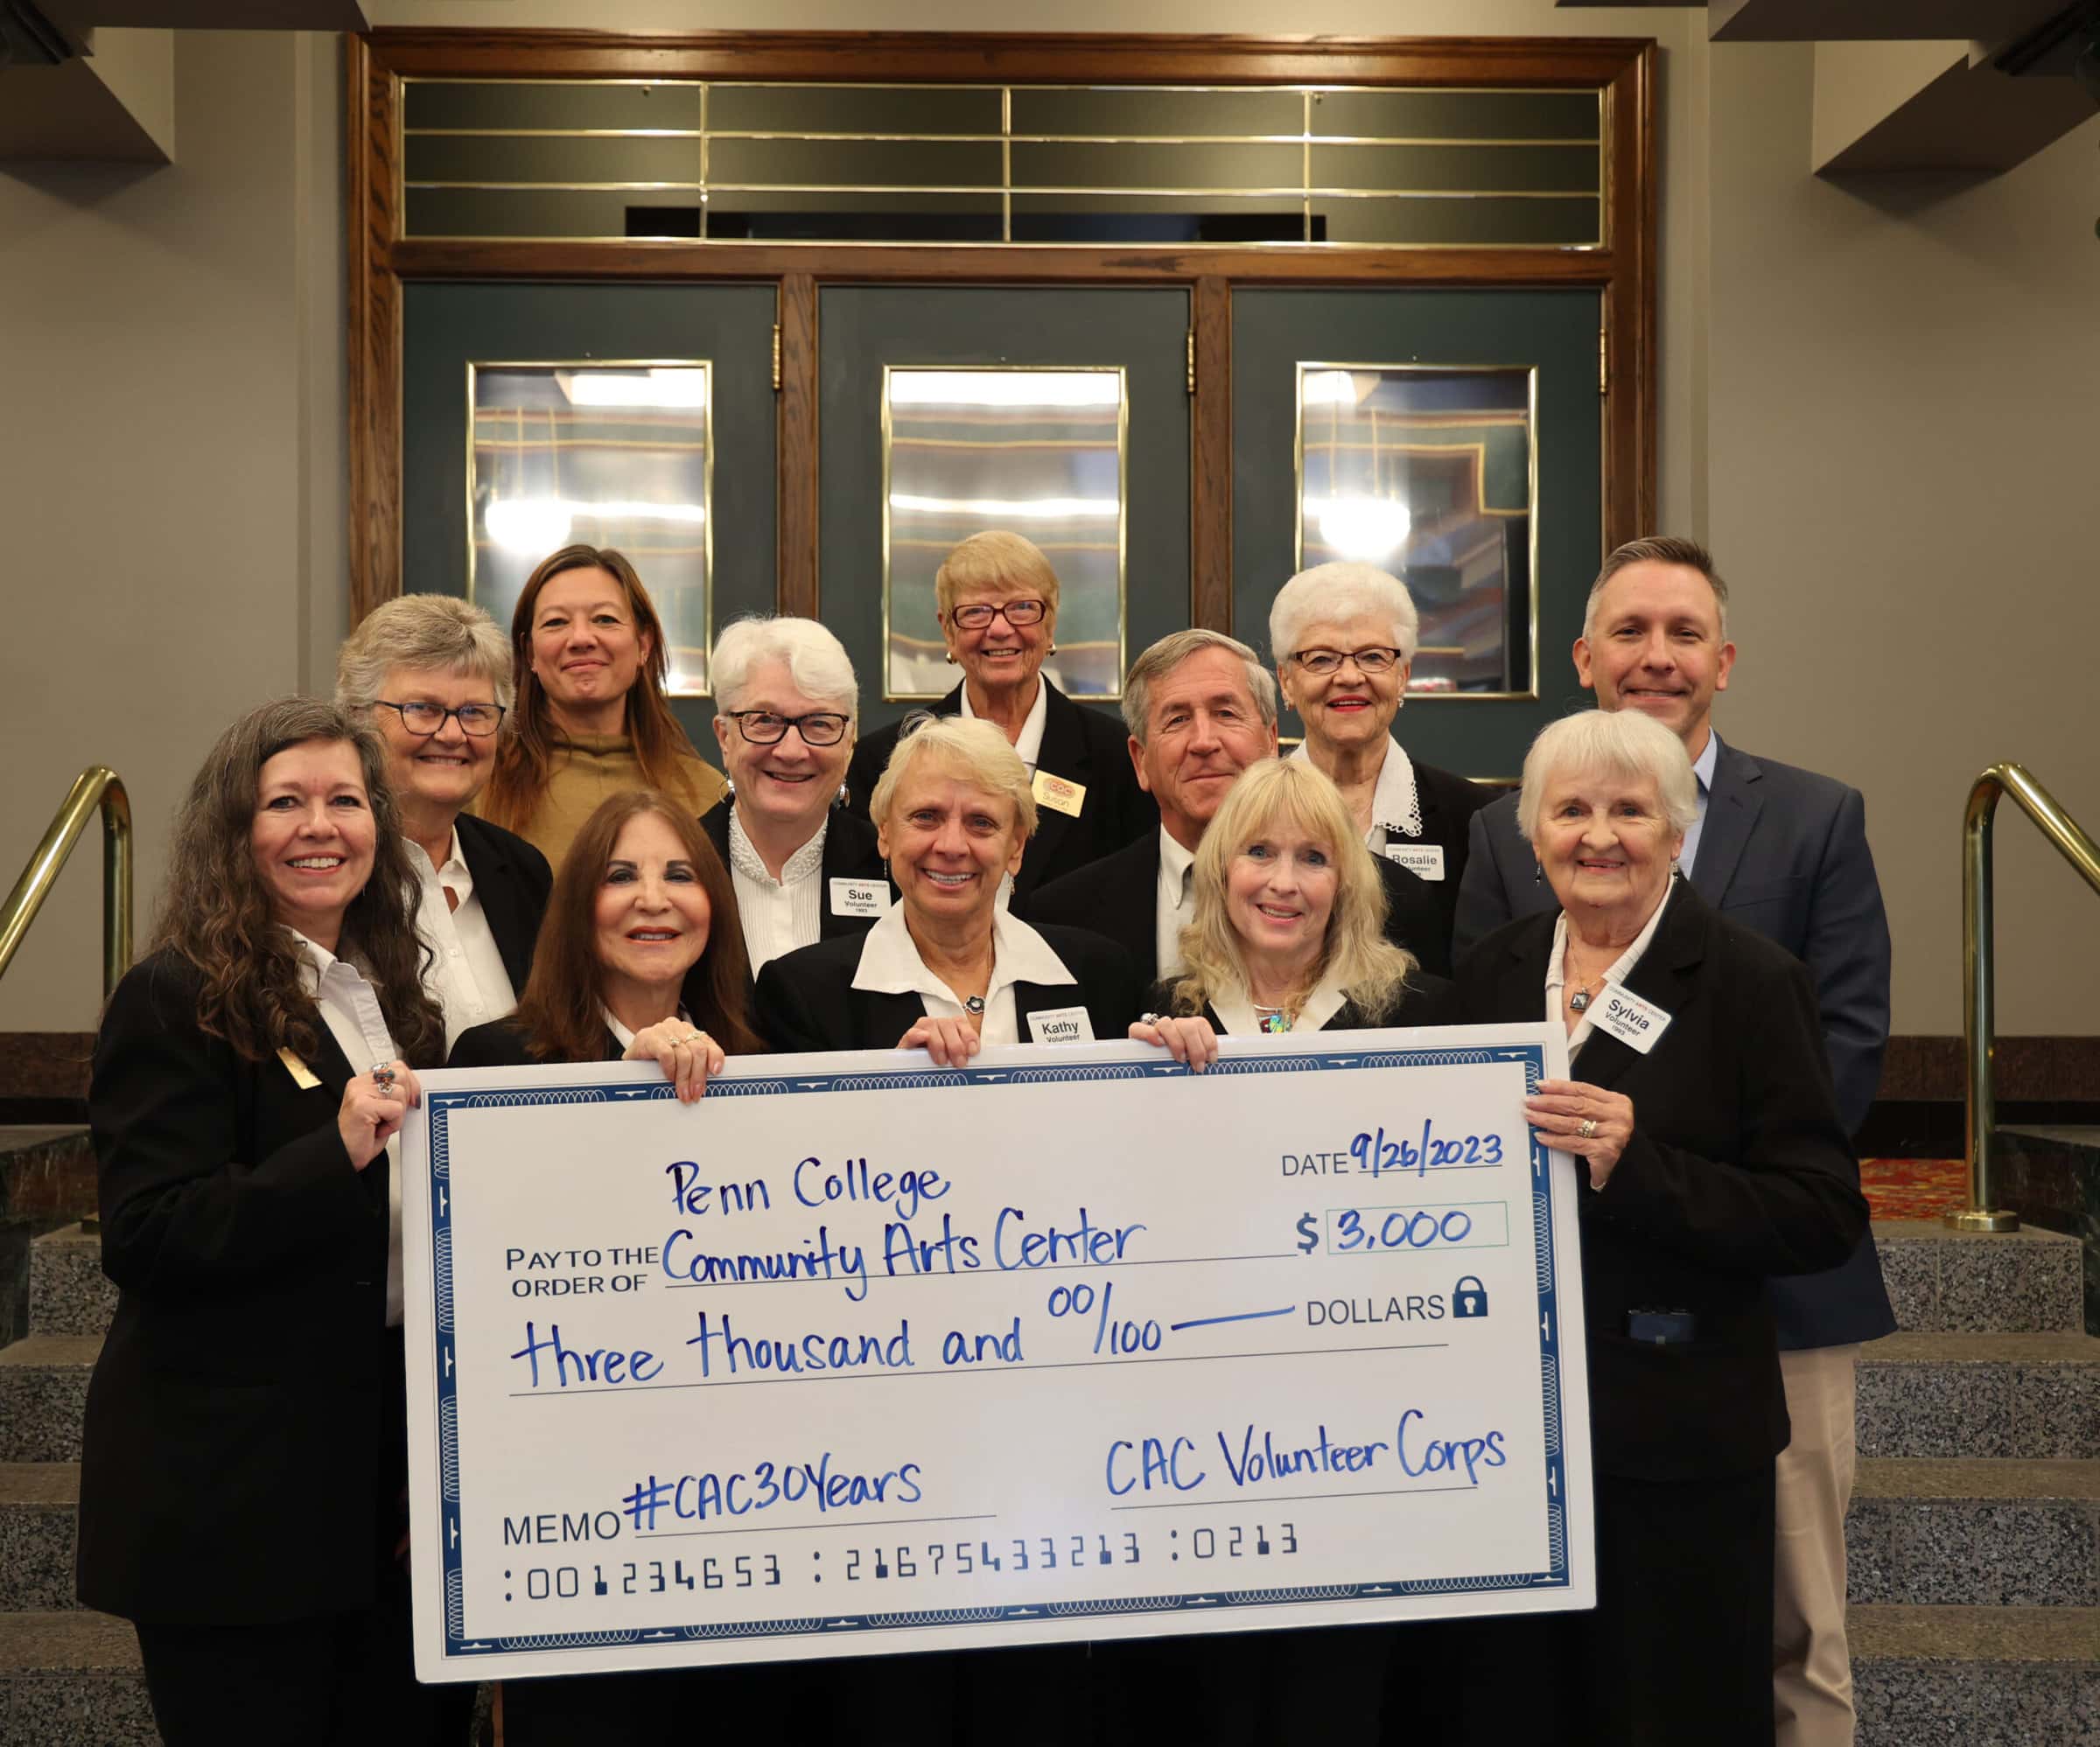 CAC Volunteer Corps donates in celebration of 30 years